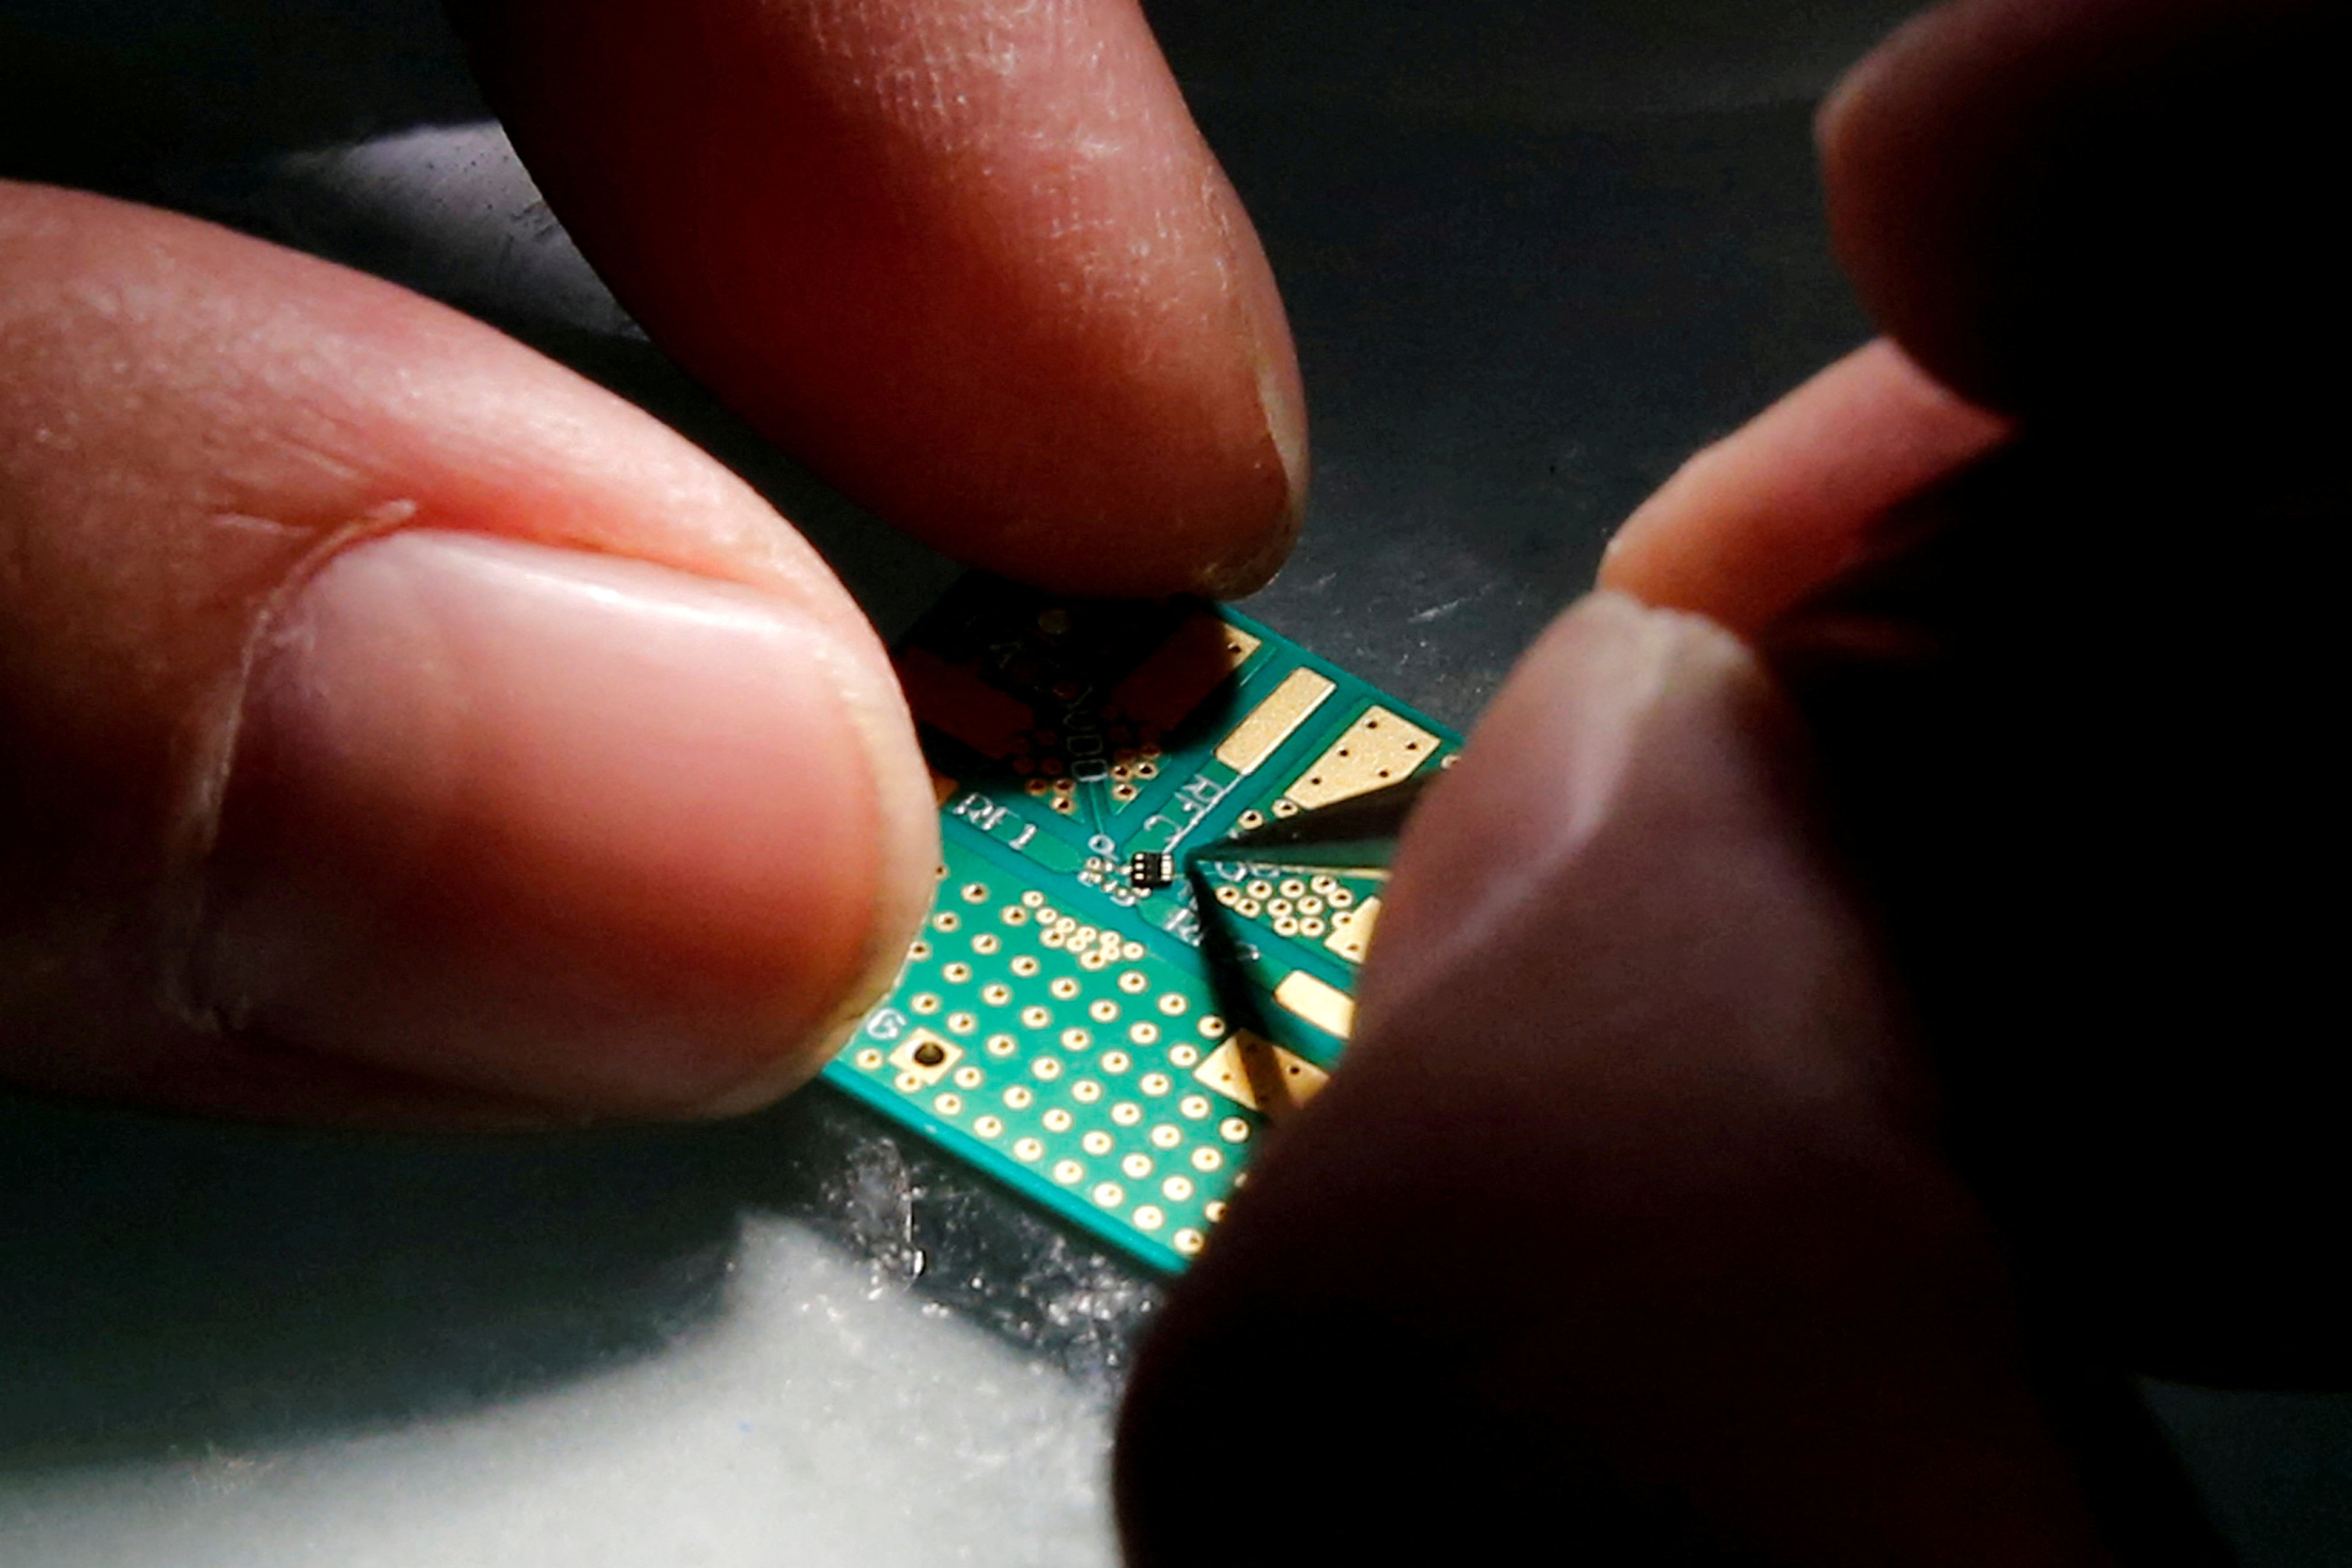 Exclusive: China prepares 3bn package for its chip firms in face of US curbs